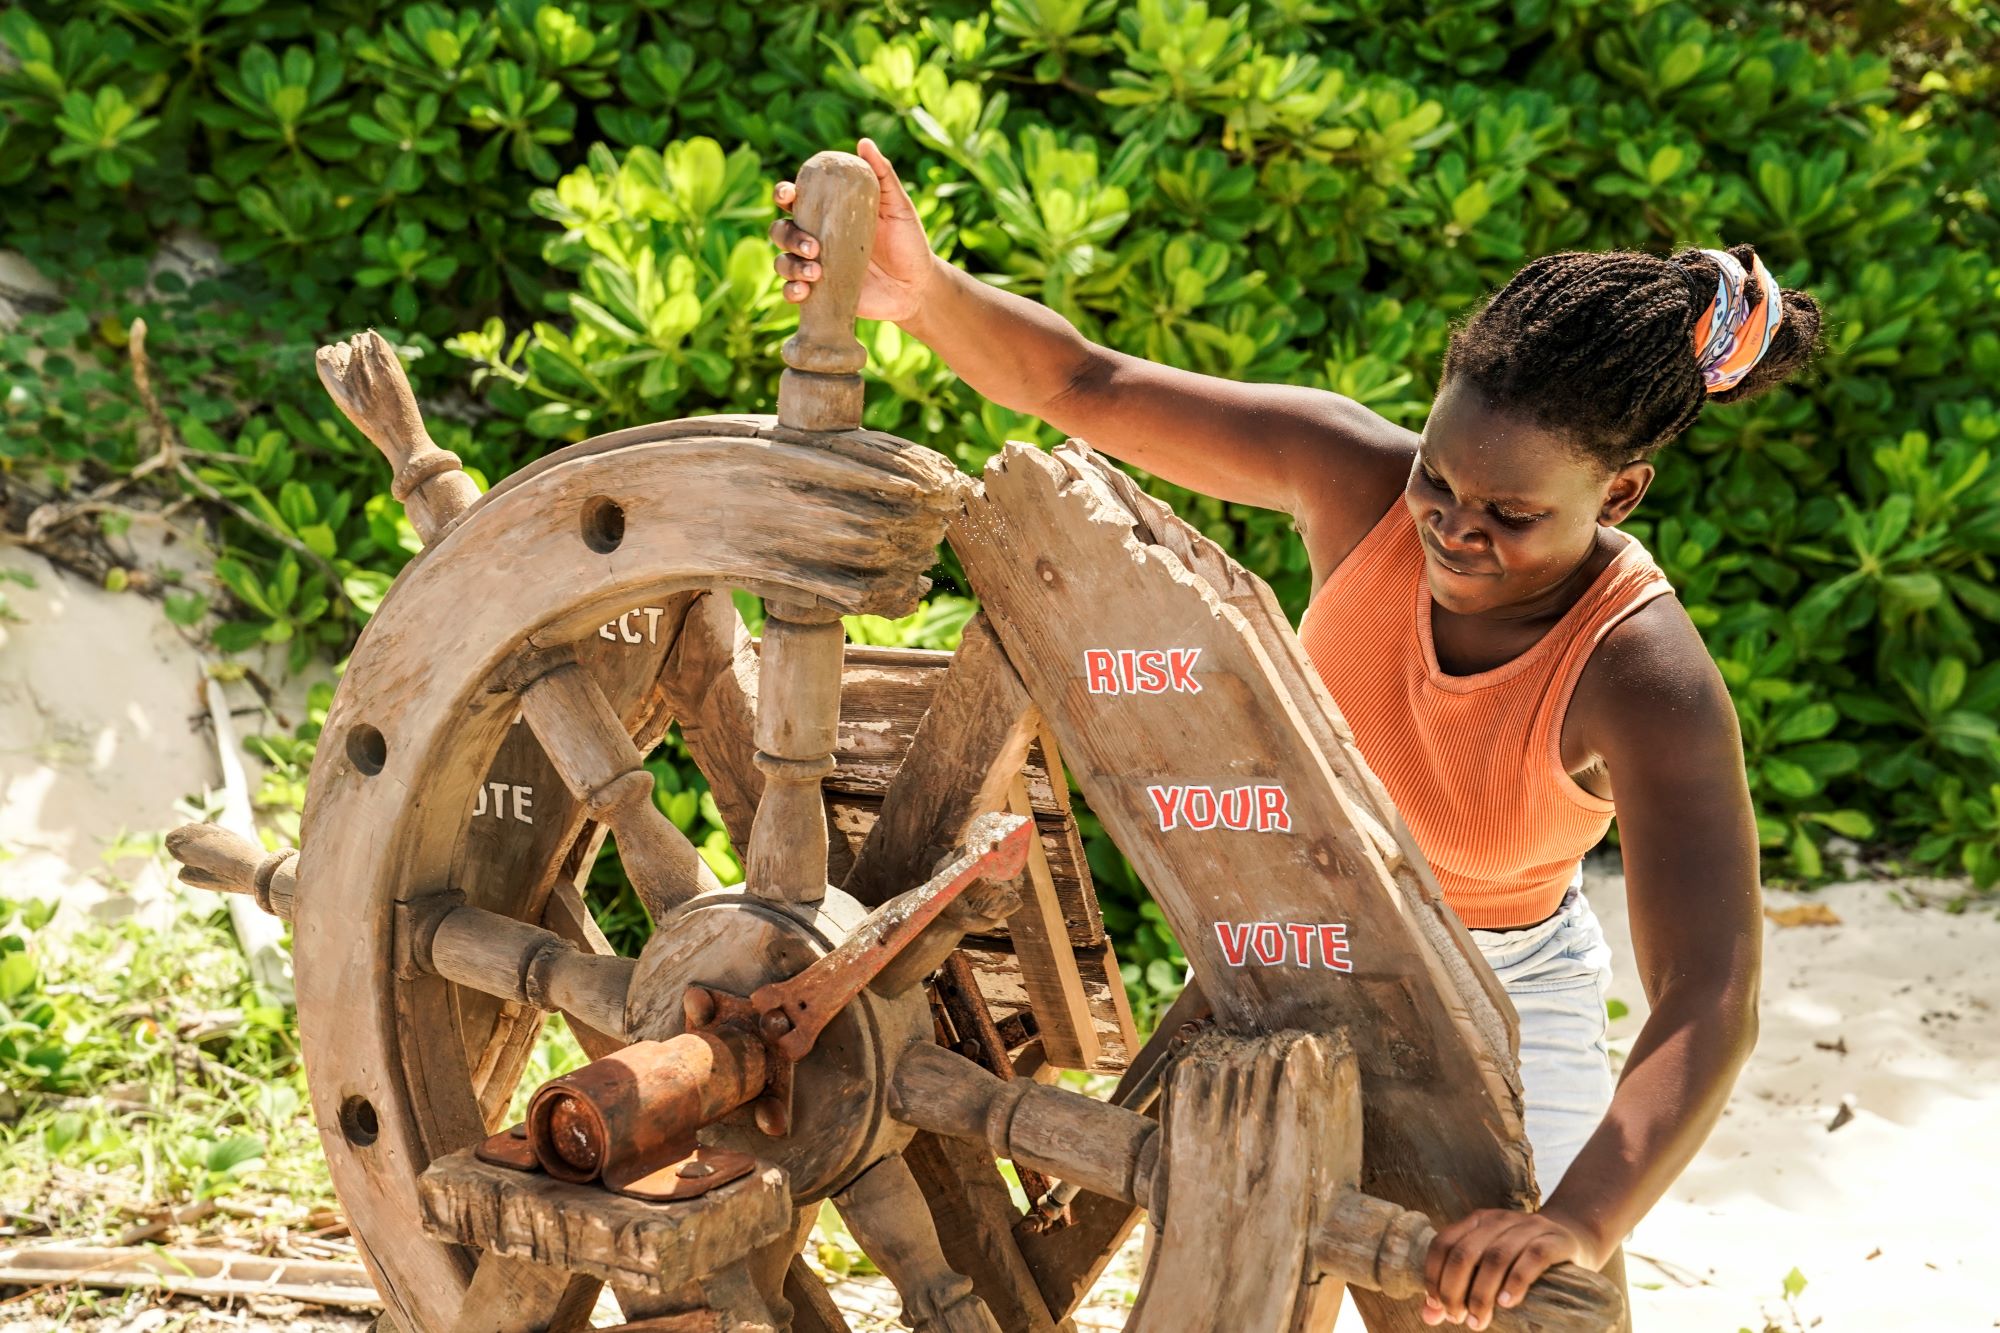 Maryanne Oketch, who some believe is the 'Survivor' Season 42 winner, turns a wheel while wearing an orange tank top, white shorts, and her orange buff in her hair.